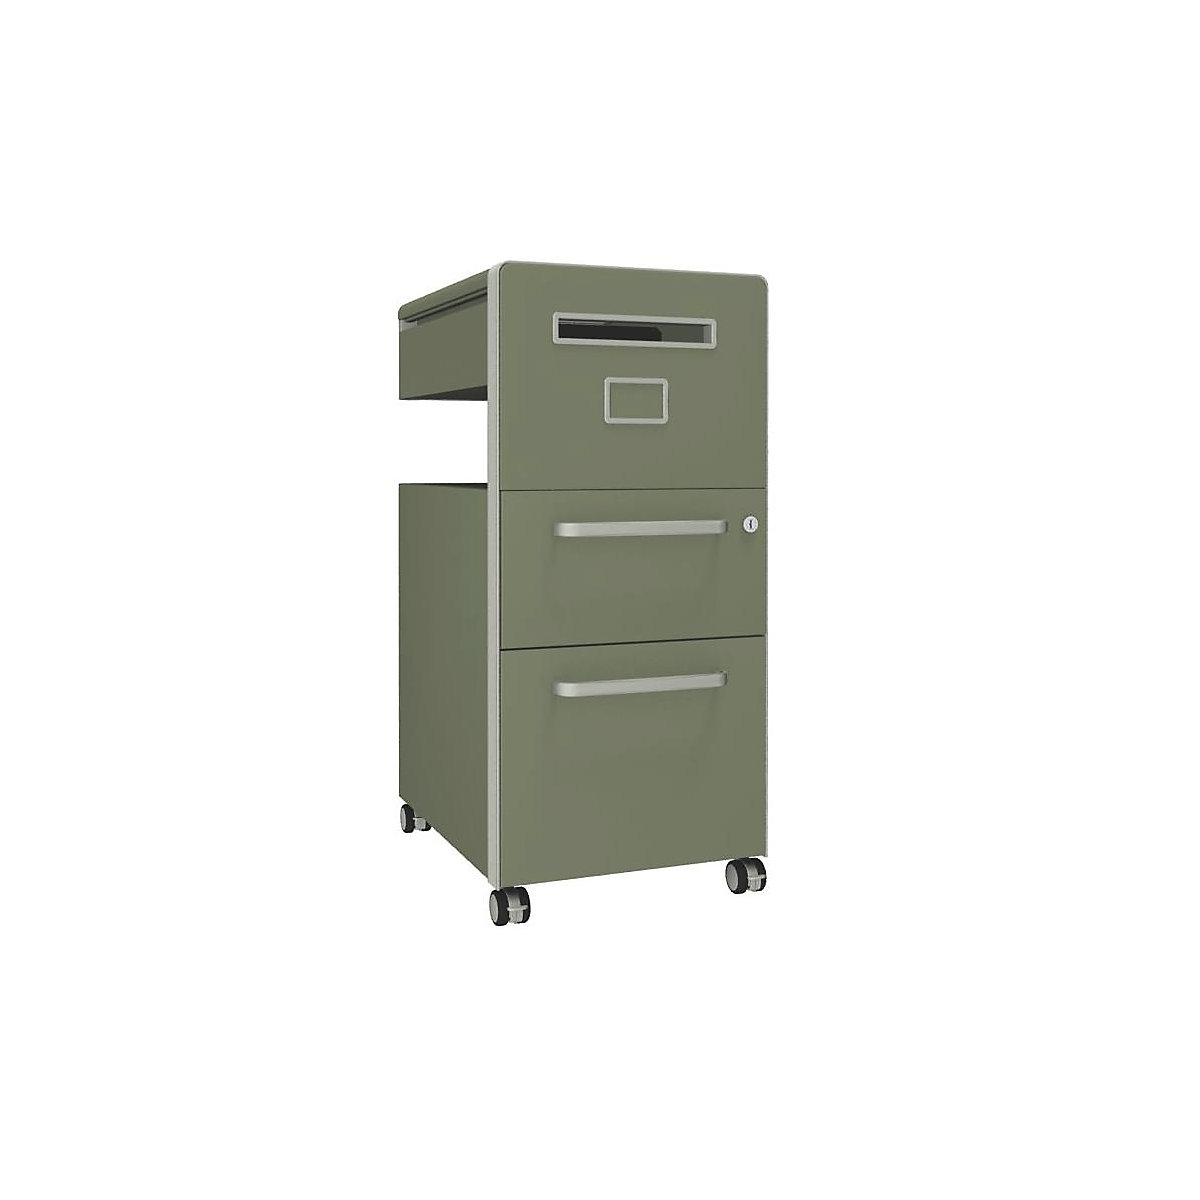 Bite™ pedestal furniture, with 1 whiteboard, opens on the right side – BISLEY, with 1 universal drawer, 1 suspension file drawer, regent-11